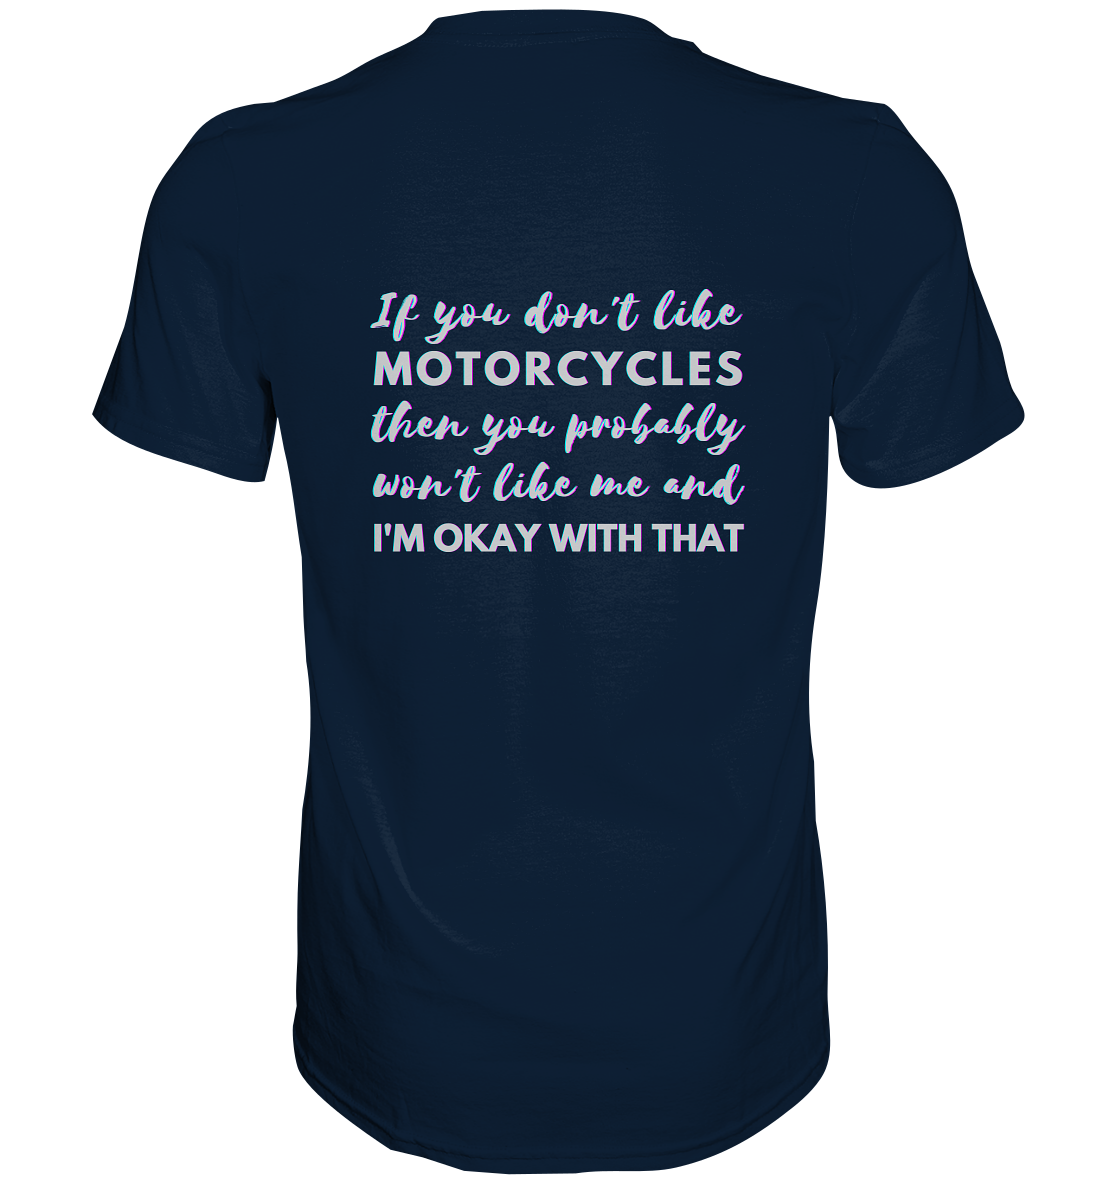 Herren-T-Shirt, Rundhals, mit weißem Spruch auf dem Rücken "If you don't like motorcycles, you problably won't like me and I'm okay with that." dunkel blau